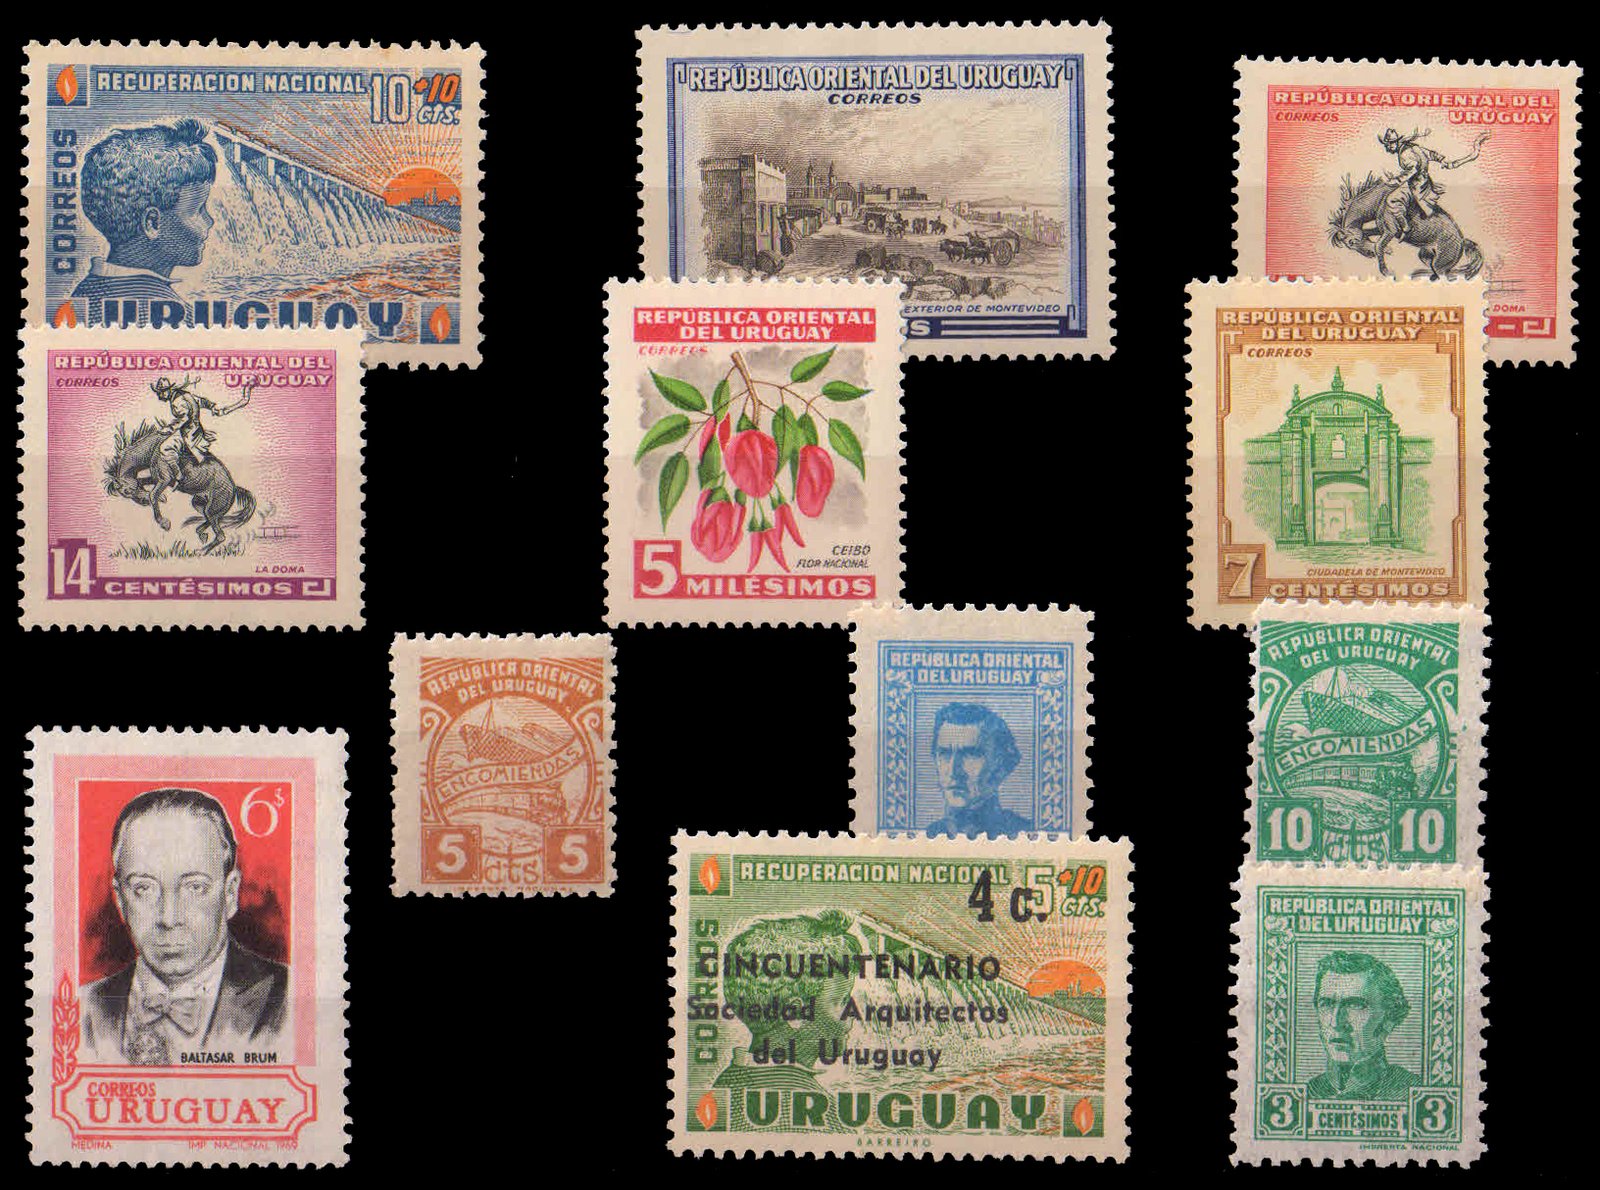 URUGUAY - 12 Different Old Mint Postage Stamps-Large and Small